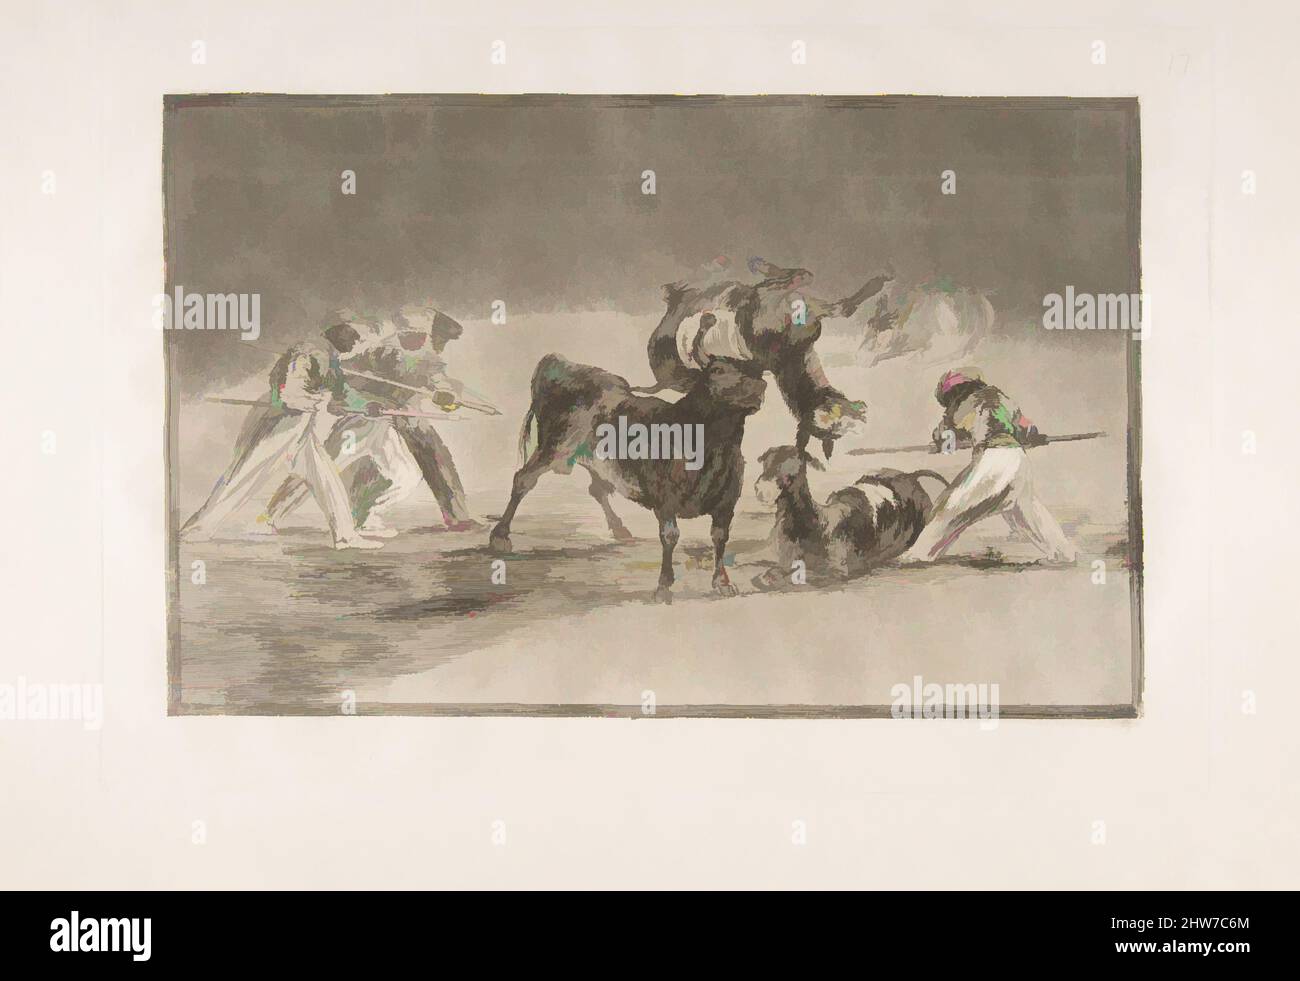 Art inspired by Plate 17 of the 'Tauromaquia': The Moors use donkeys as a barrier to defend themselves against the bull whose horns have been tipped with balls., 1816, Etching, burnished aquatint, drypoint and burin, Plate: 9 9/16 x 13 3/4 in. (24.3 x 35 cm), Prints, Goya (Francisco de, Classic works modernized by Artotop with a splash of modernity. Shapes, color and value, eye-catching visual impact on art. Emotions through freedom of artworks in a contemporary way. A timeless message pursuing a wildly creative new direction. Artists turning to the digital medium and creating the Artotop NFT Stock Photo